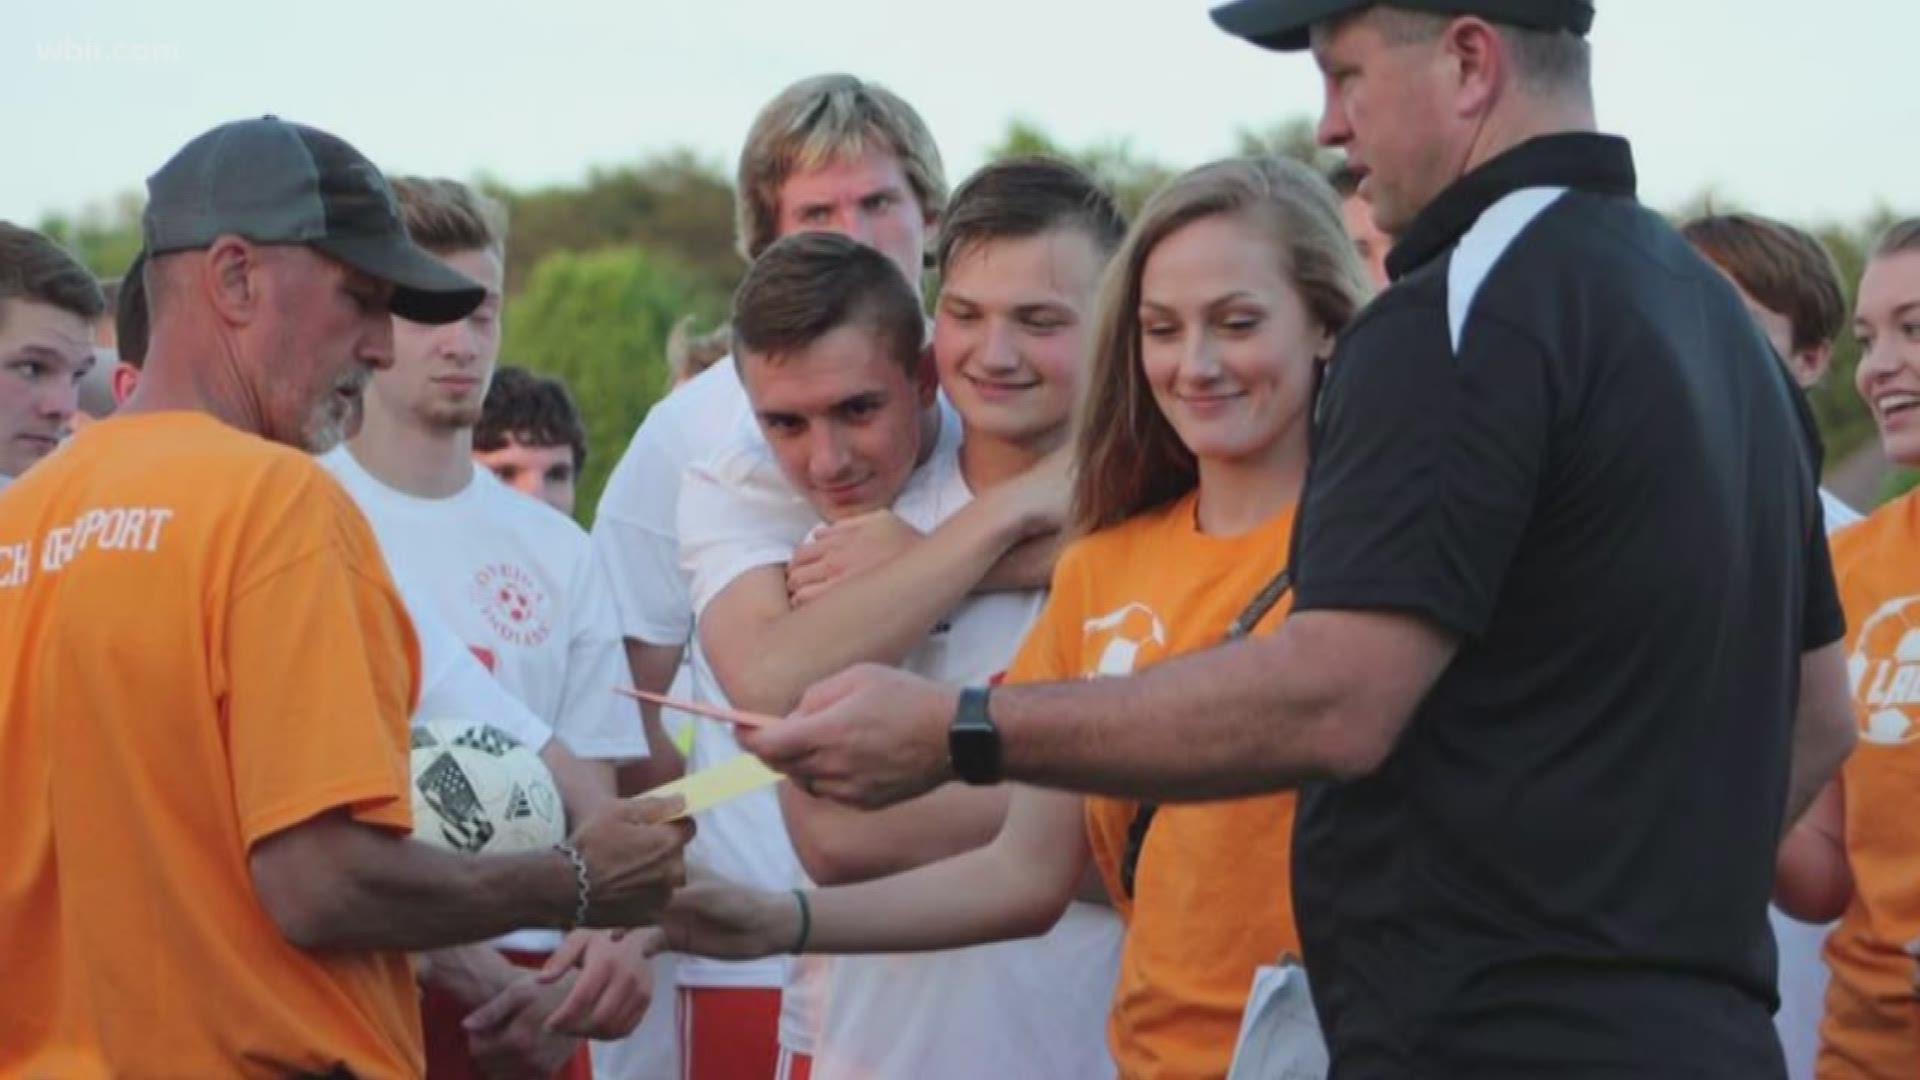 Oneida soccer teams pull together for coach